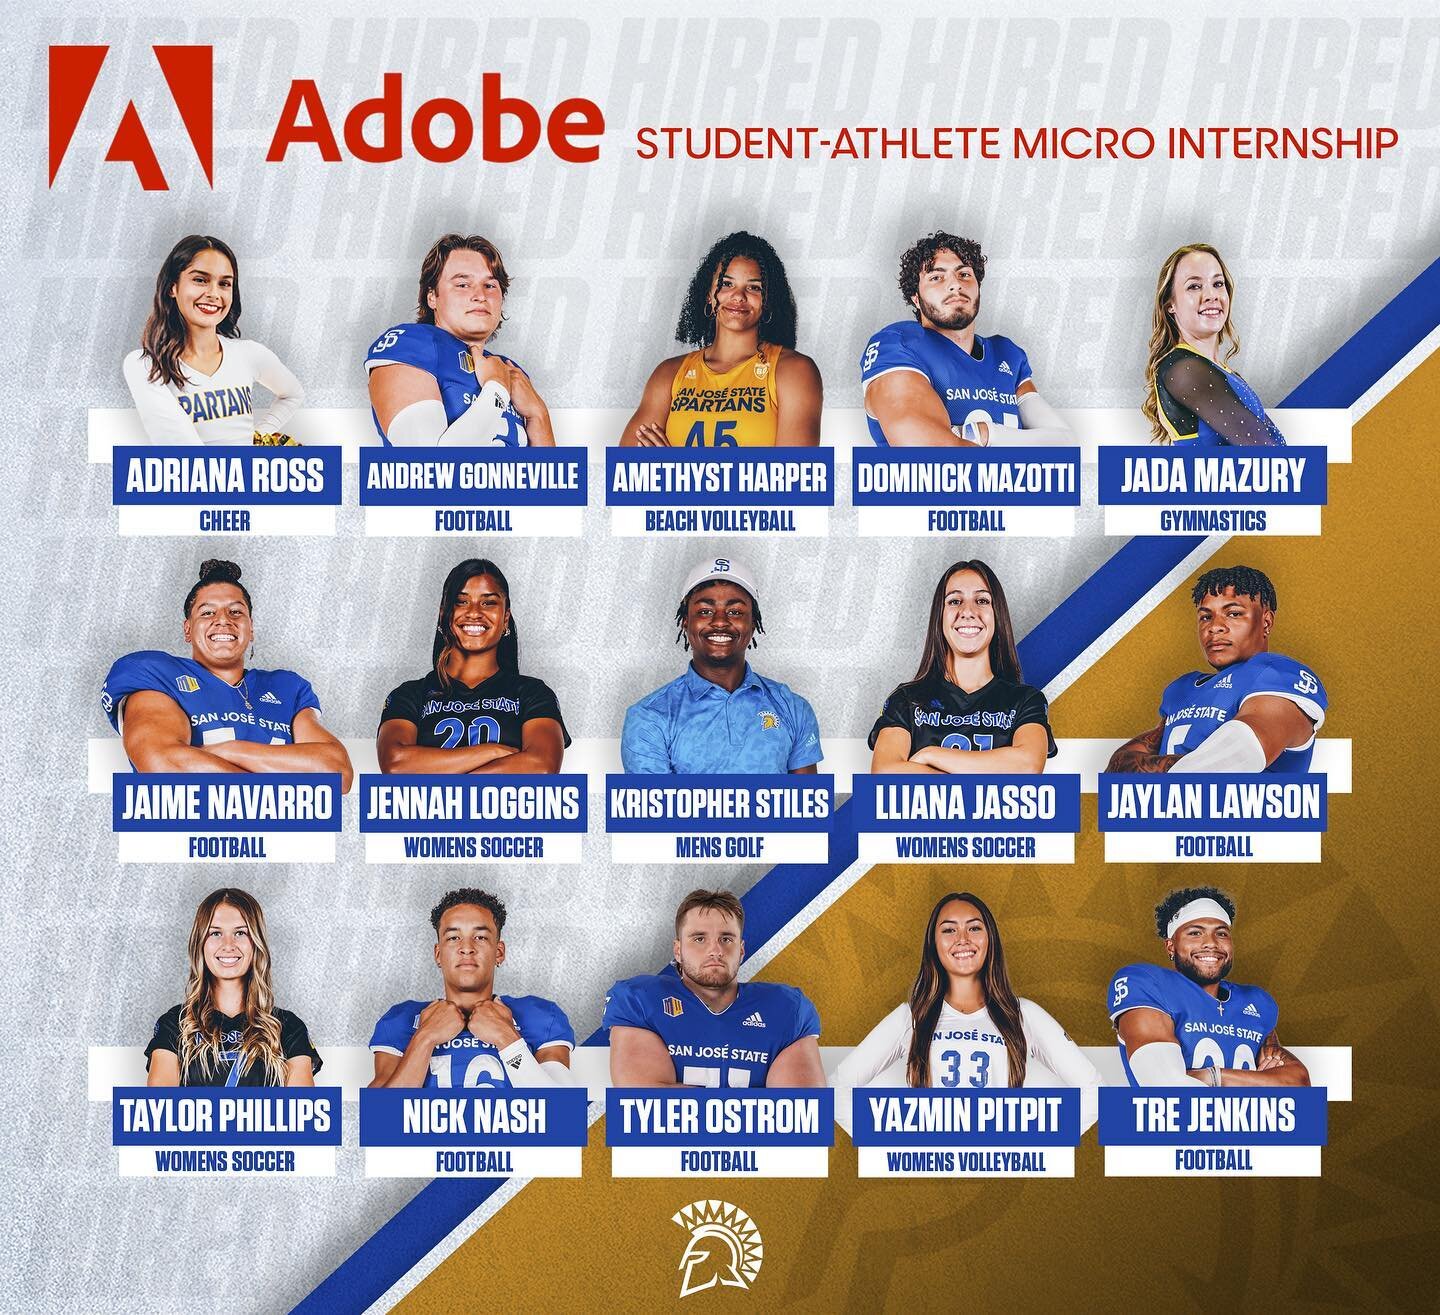 Today is the day! Kicking off the summer with
15 Spartan Student Athletes working at Adobe this summer!

Creating a Championship Life
#BeyondSparta